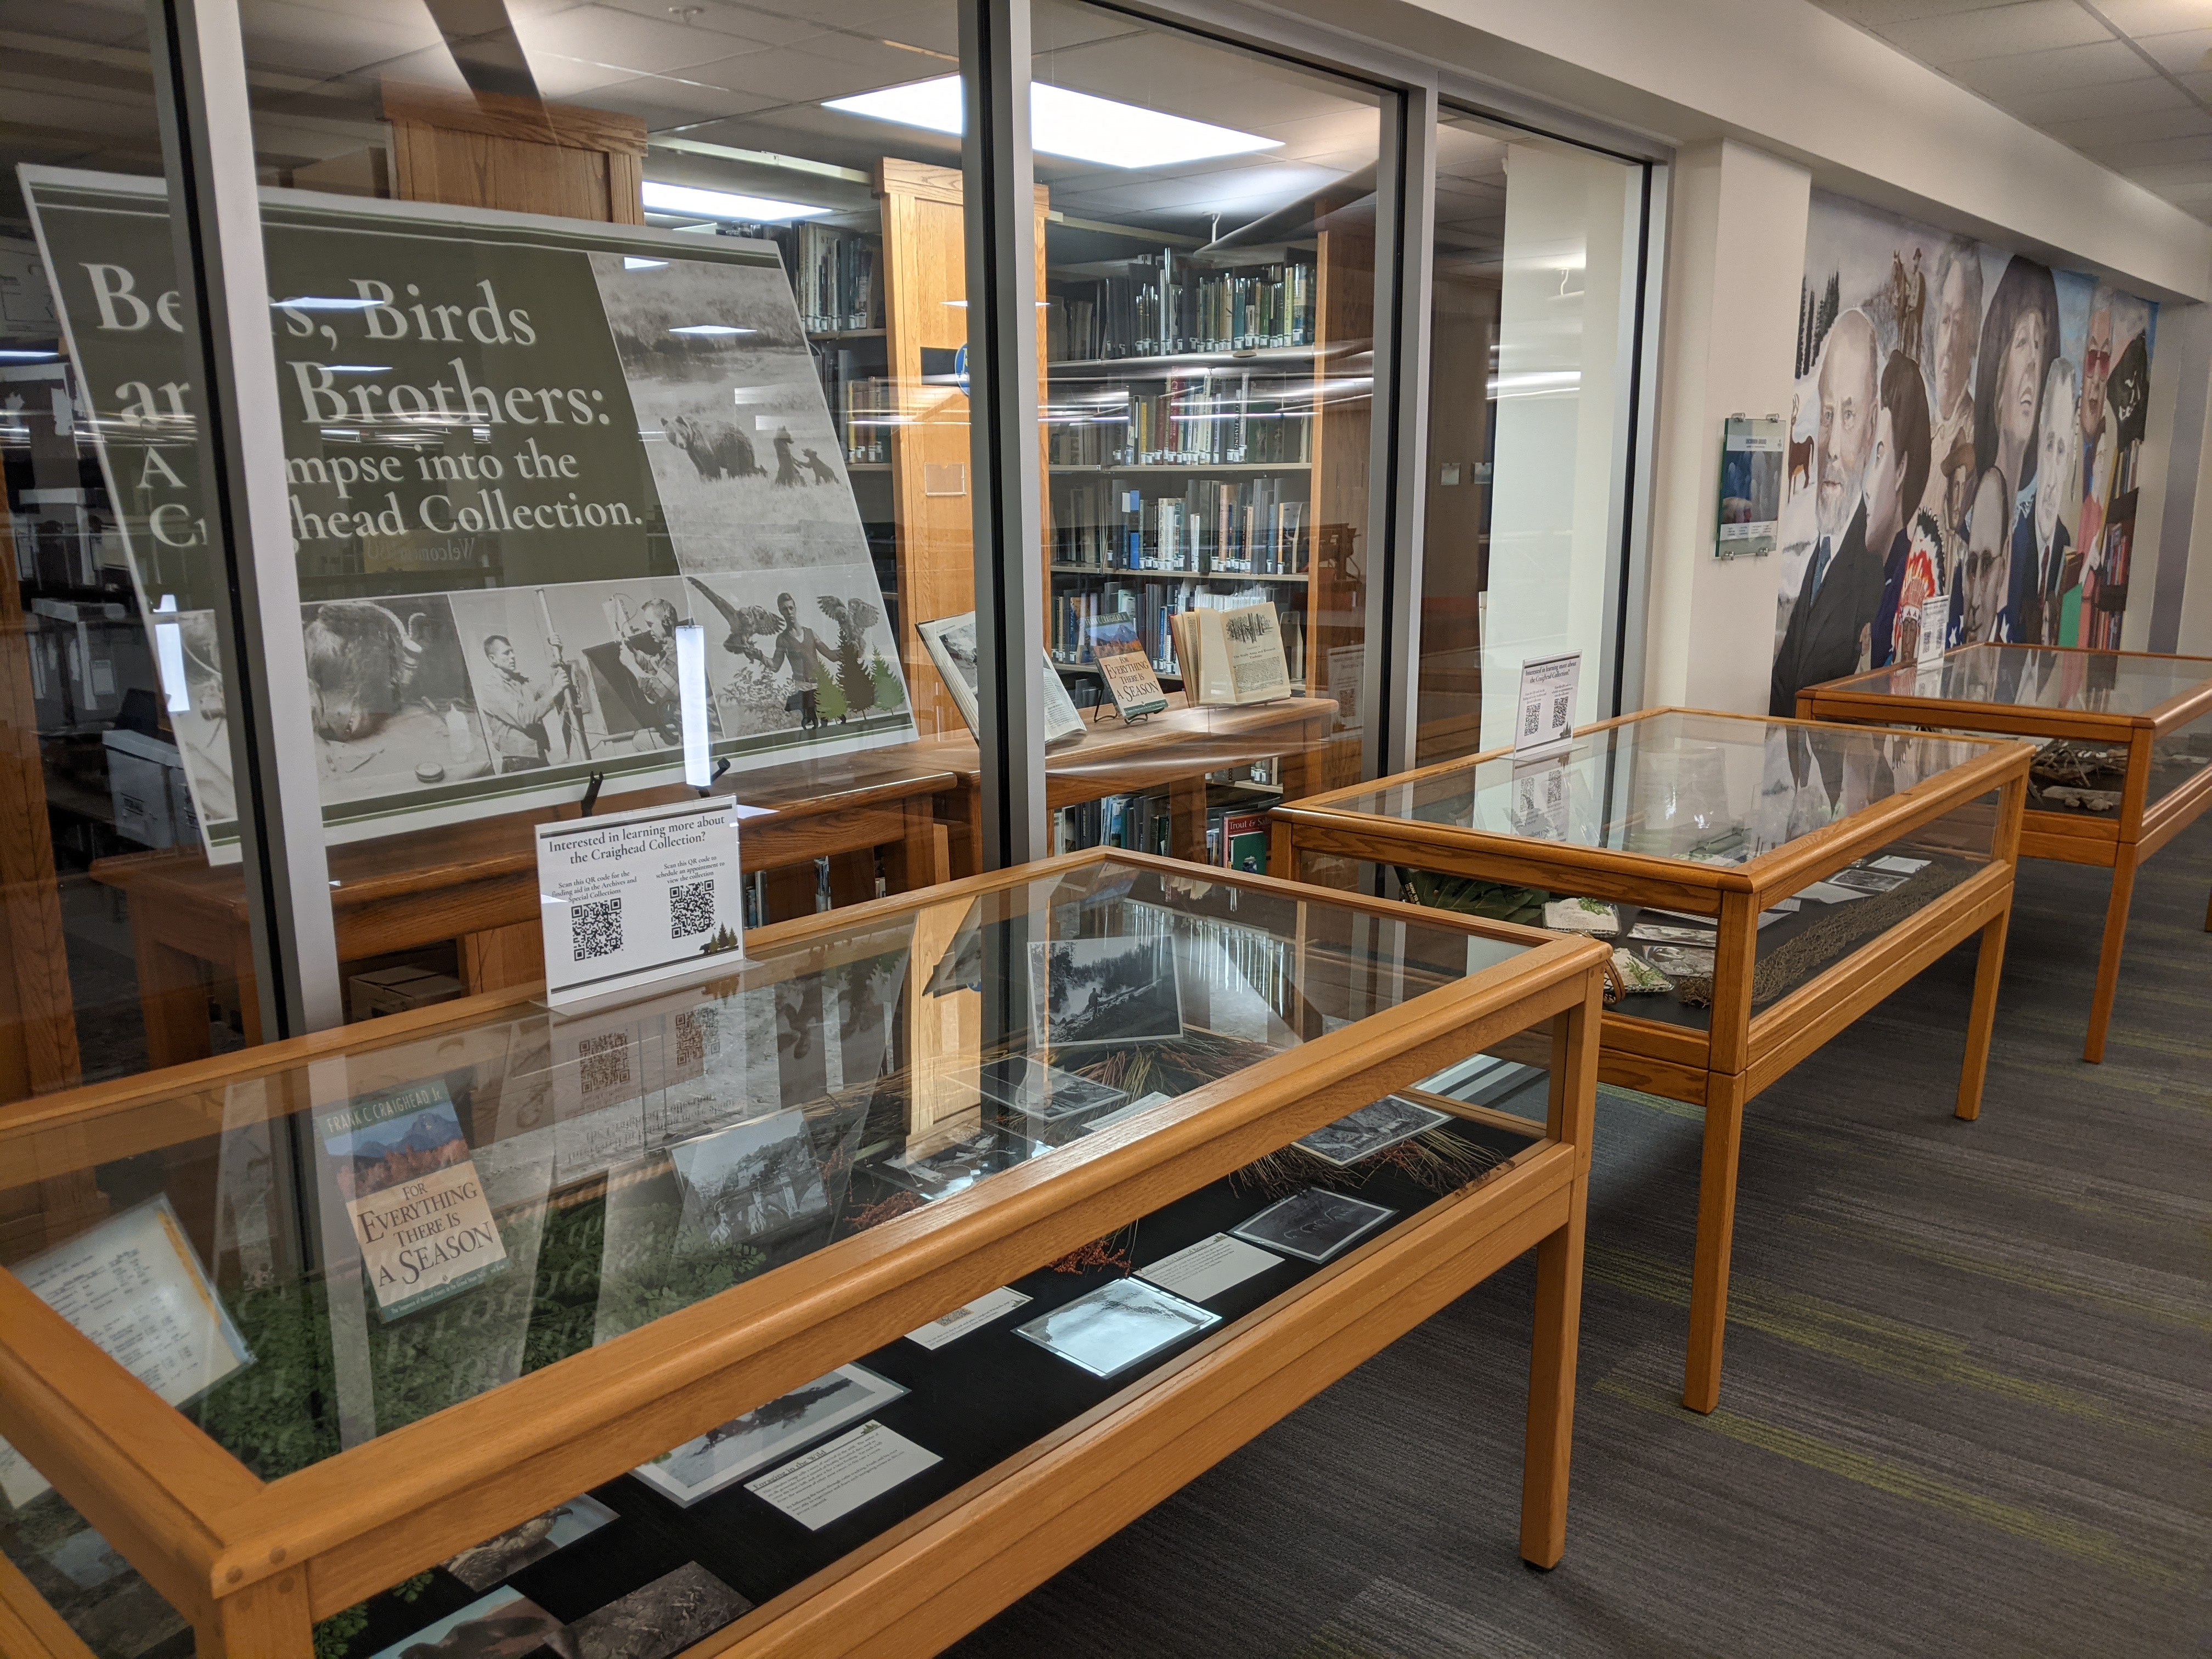 Craighead Display cases from left side